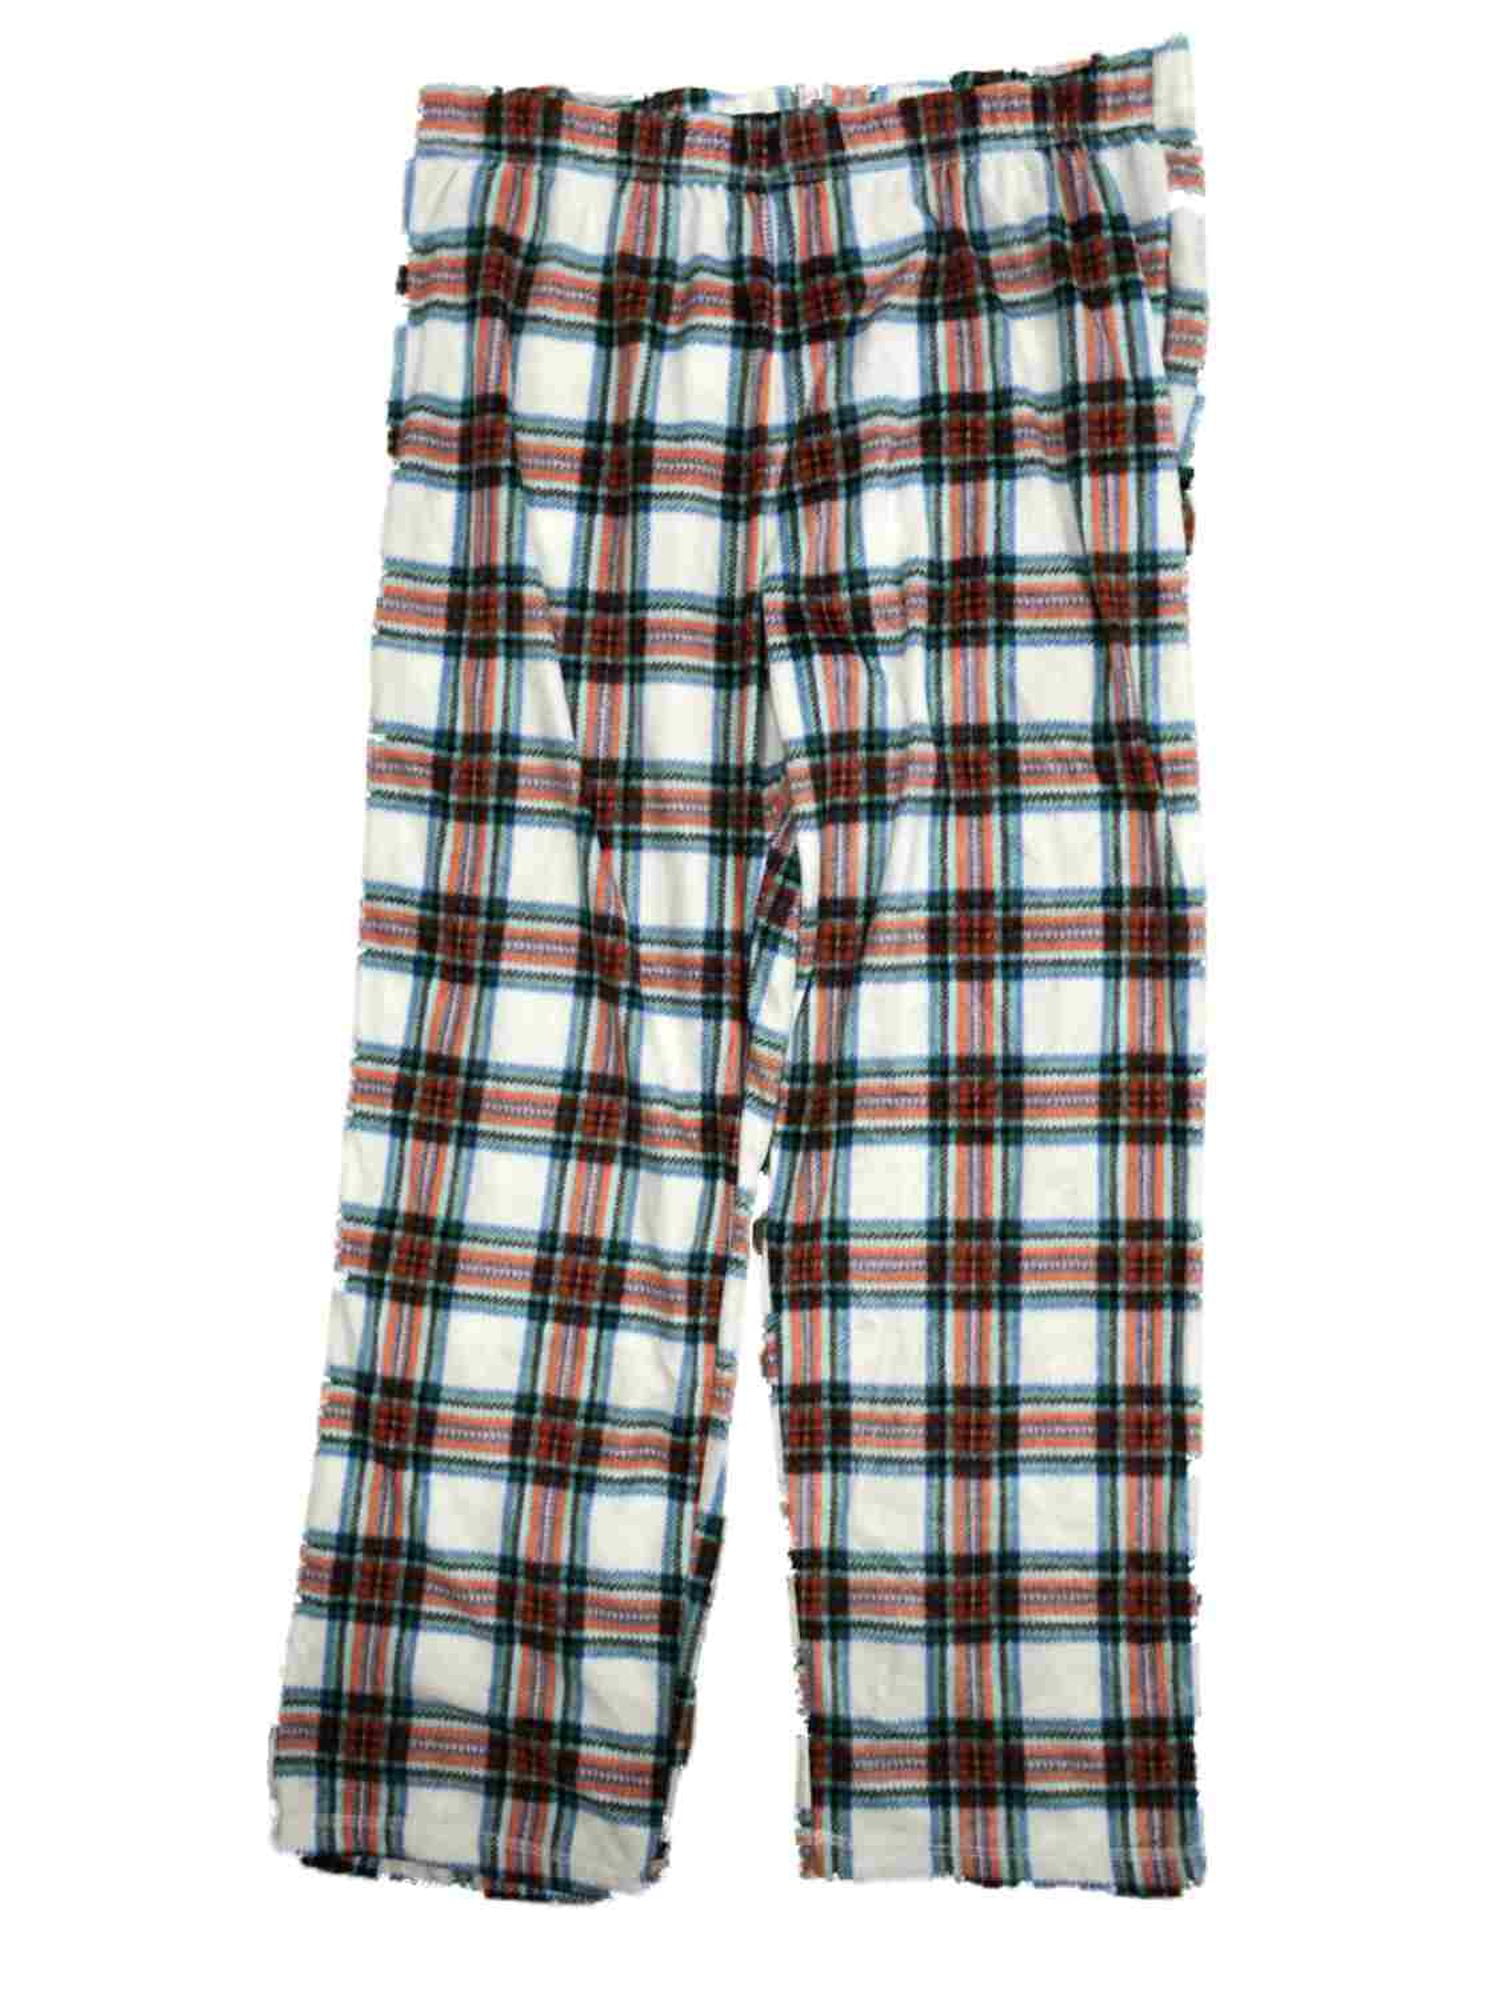 33% OFF on Womens pyjama capri pants for women? with pockets - Printed -  Solid - capri�for women? night�pants for women? cotton pants�for women? pyjama  pants for women? by Stable Impex on